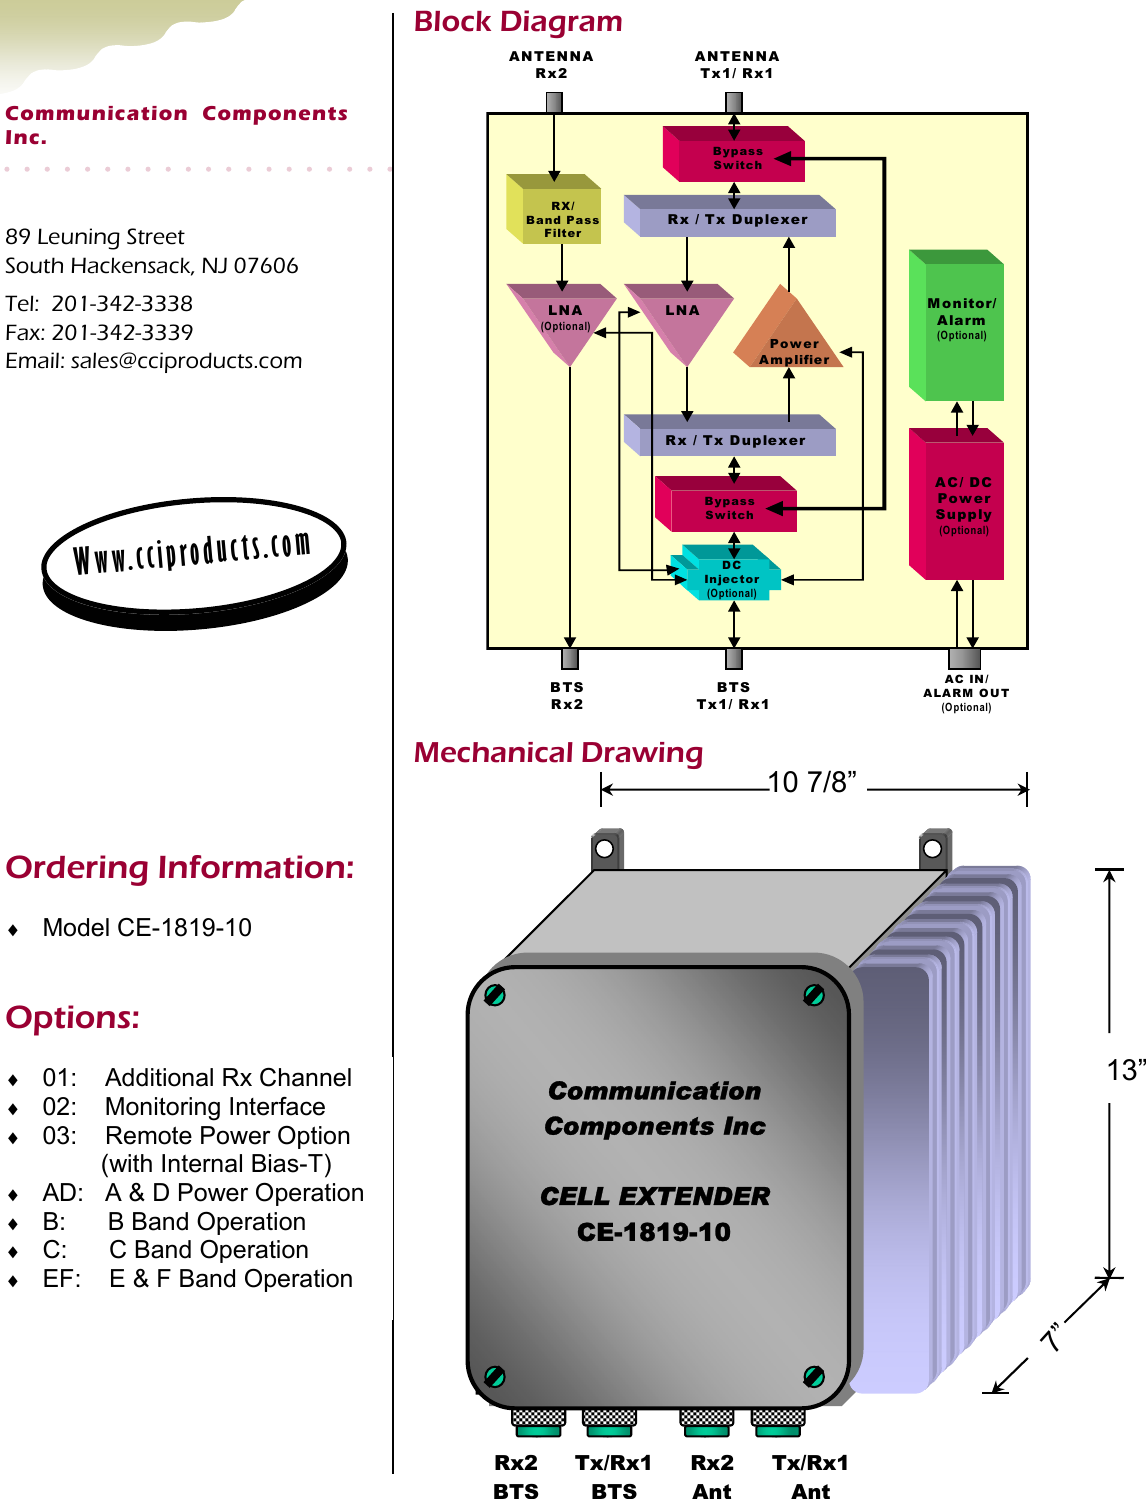 89 Leuning Street South Hackensack, NJ 07606 Tel:  201-342-3338 Fax: 201-342-3339 Email: sales@cciproducts.com Communication  Components  Inc. Www.cciproducts.com Mechanical Drawing Block Diagram Ordering Information: ♦  Model CE-1819-10 ♦  01:    Additional Rx Channel ♦  02:    Monitoring Interface ♦  03:    Remote Power Option       (with Internal Bias-T) ♦  AD:   A &amp; D Power Operation ♦  B:      B Band Operation ♦  C:      C Band Operation ♦  EF:    E &amp; F Band Operation Options: BypassSwitchRx / Tx DuplexerRX/Band PassFilterLNAPowerAmplifierAC/ DCPowerSupply(Optional)Monitor/Alarm(Optional)ANTENNATx1/ Rx1BypassSwitchRx / Tx DuplexerDCInjector(Optional)ANTENNARx2LNA(Optional)BTSTx1/ Rx1BTSRx2AC IN/ALARM OUT(Optional)Tx/Rx1 BTS Rx2 BTS 10 7/8” 13” 7” Tx/Rx1 Ant Rx2 Ant Communication Components Inc  CELL EXTENDER CE-1819-10 